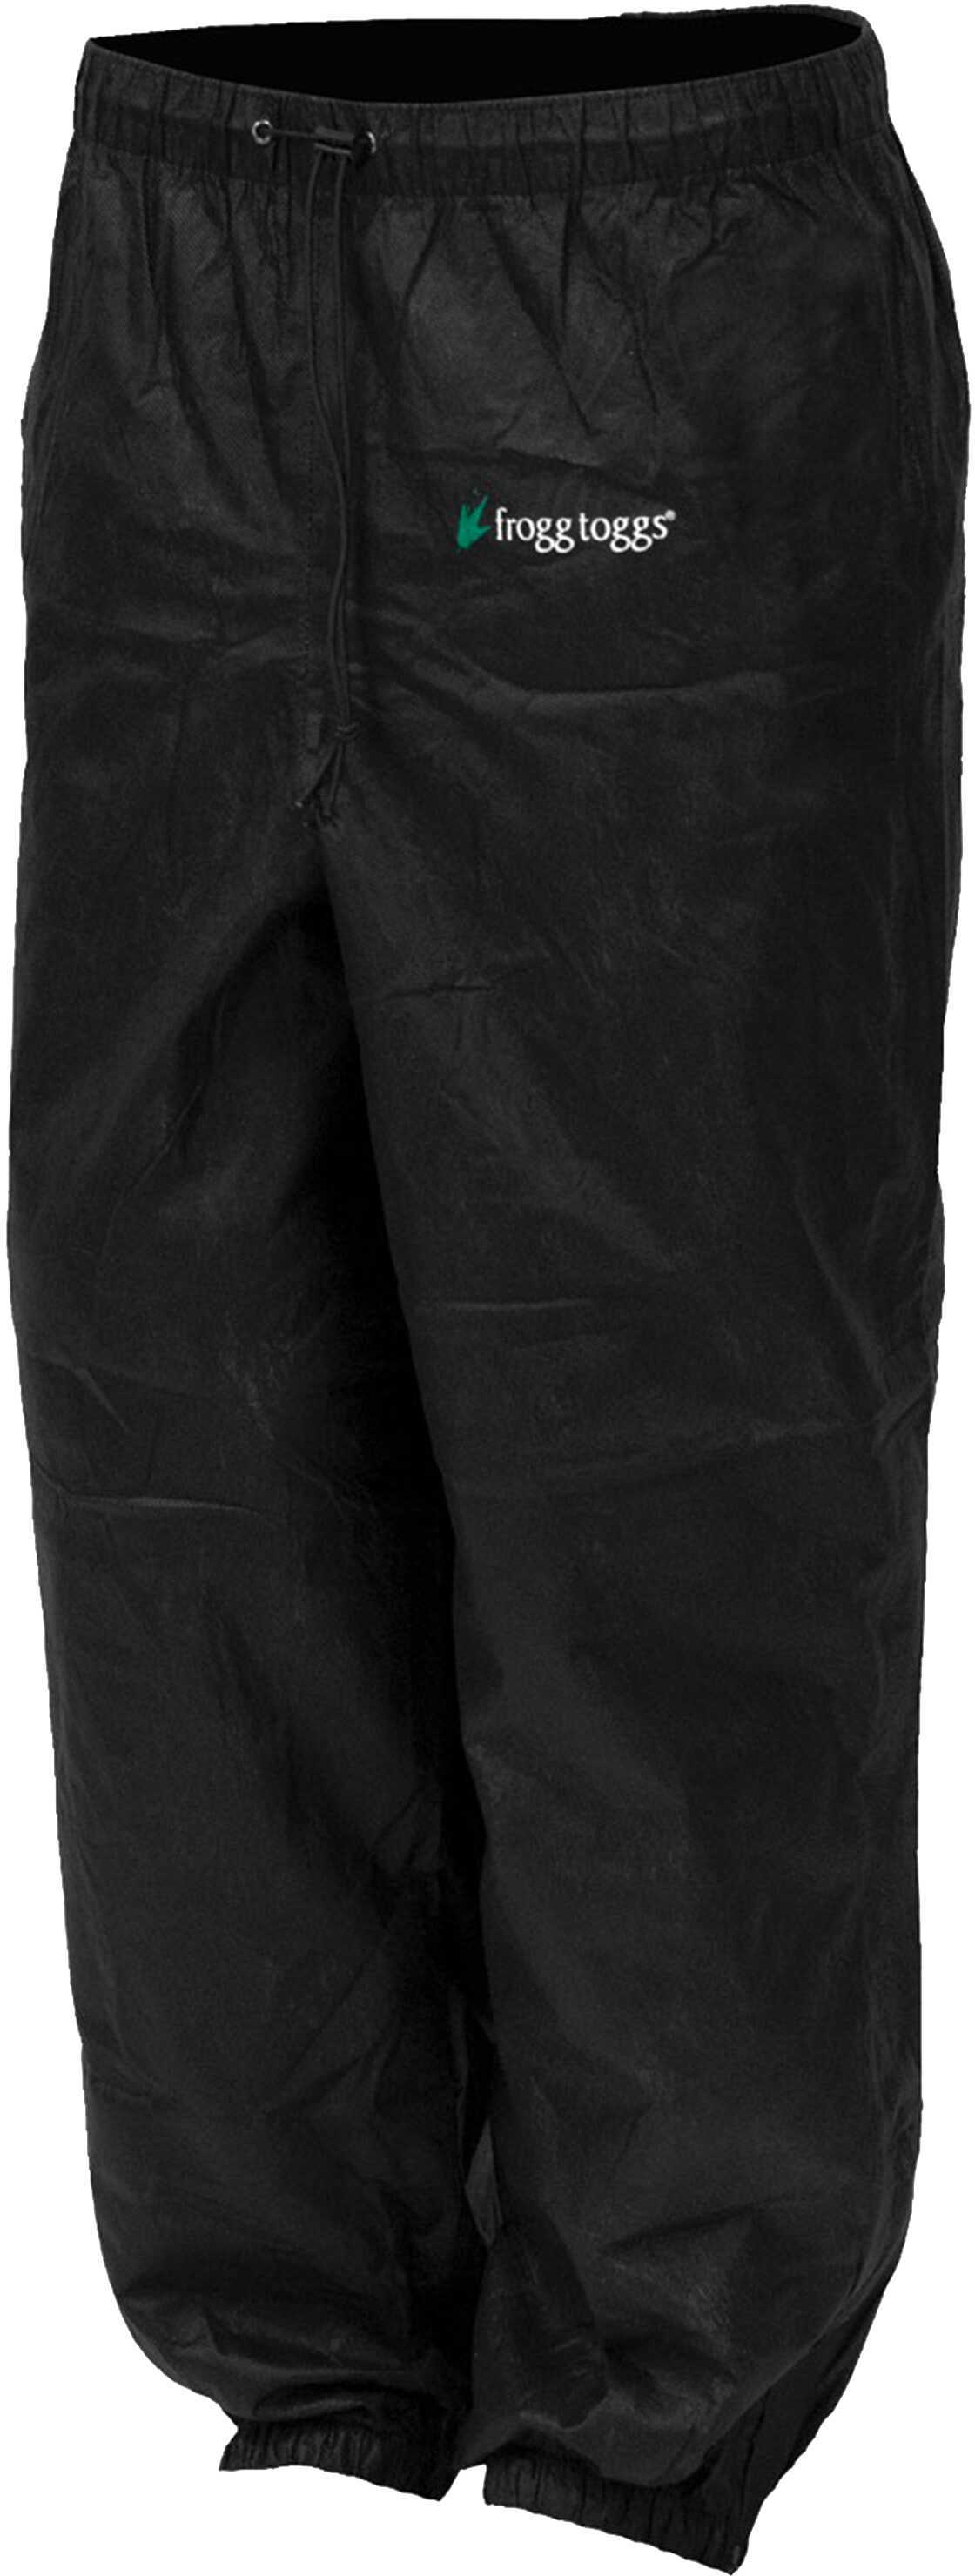 Frogg Toggs Pro Action Pant Ladies Black Med PA83522-01MD